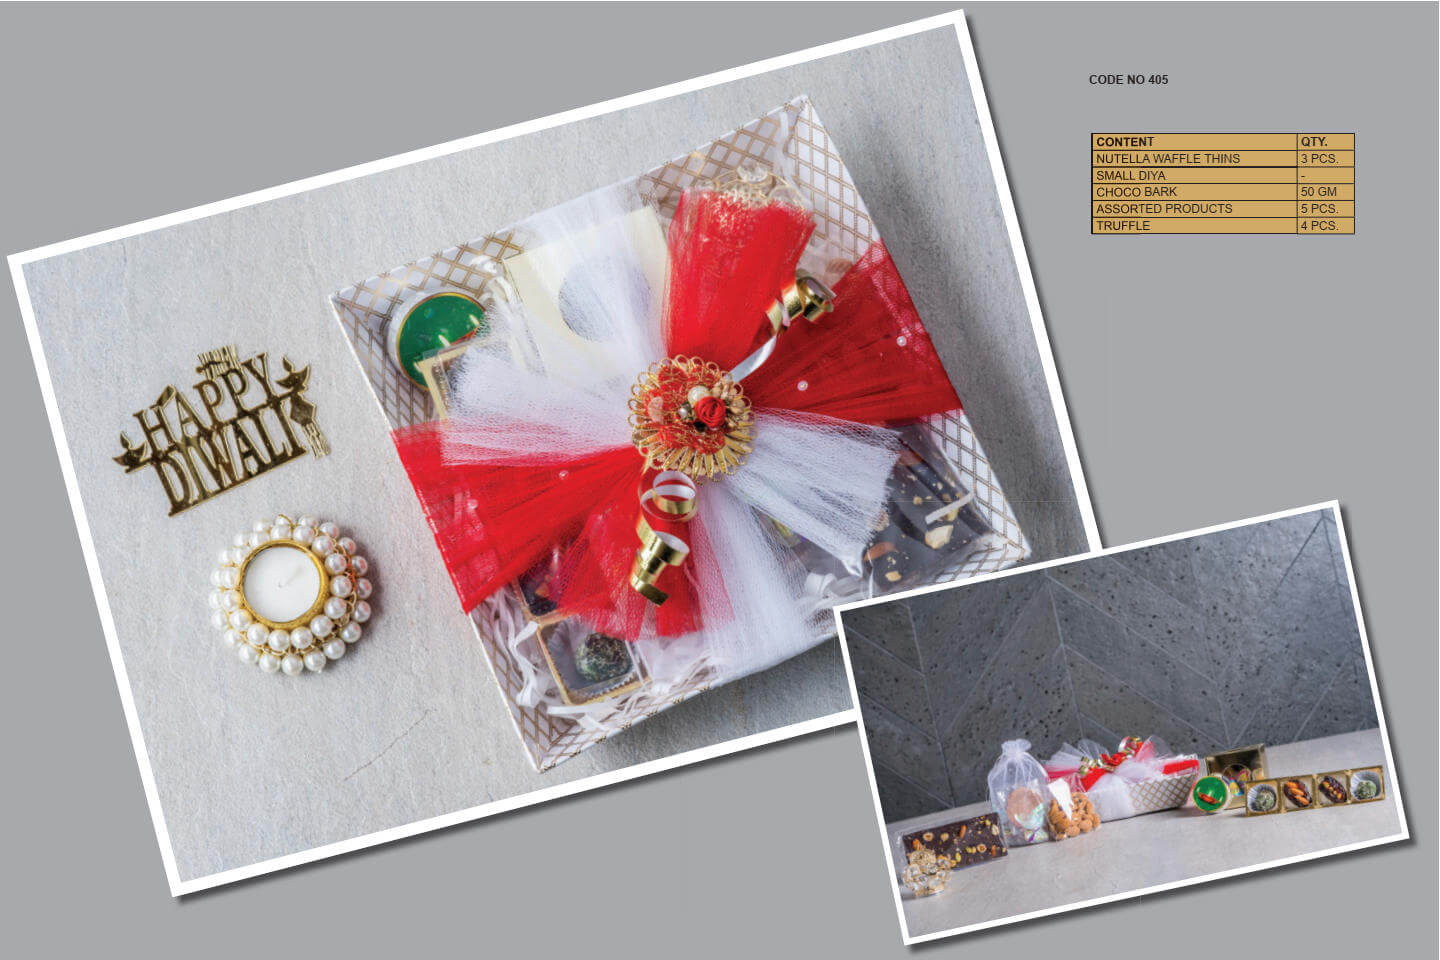 Personalized Diwali Gifts CODE NO 405